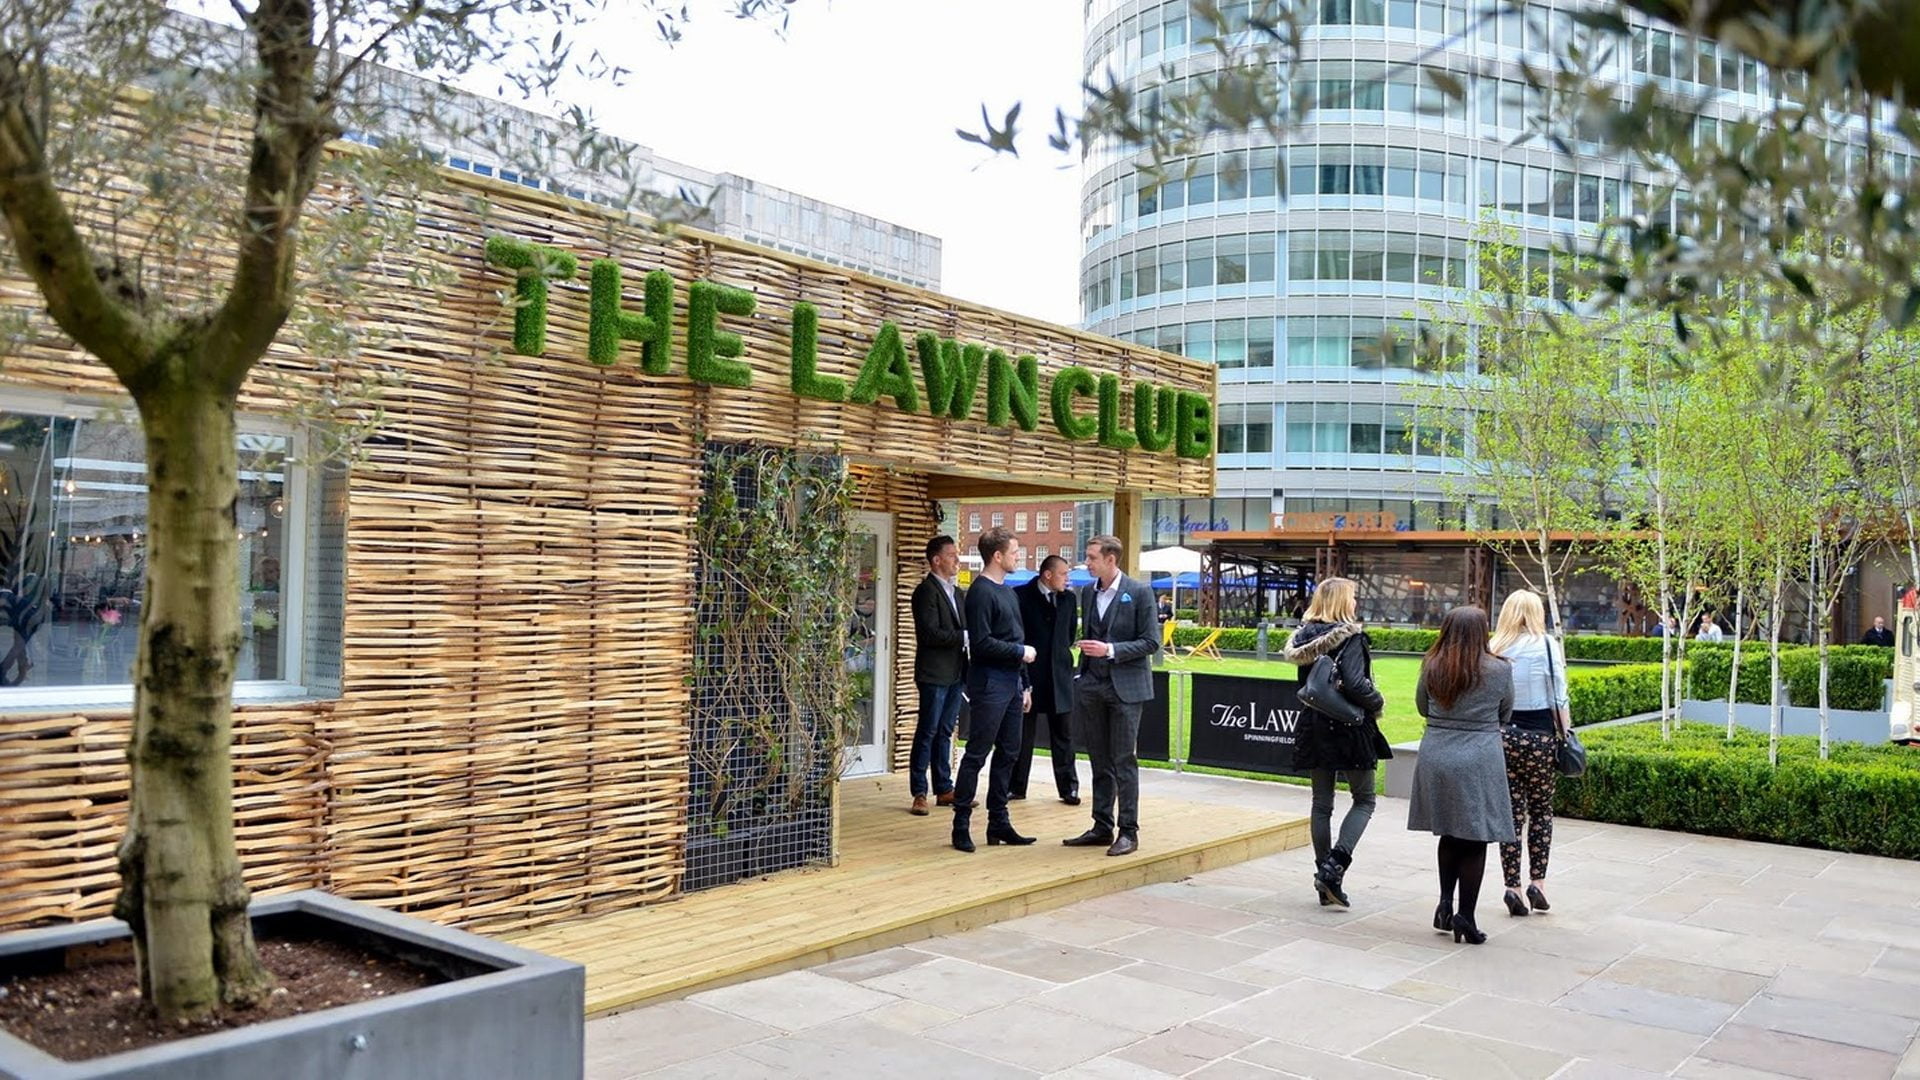 the lawn club spinningfields